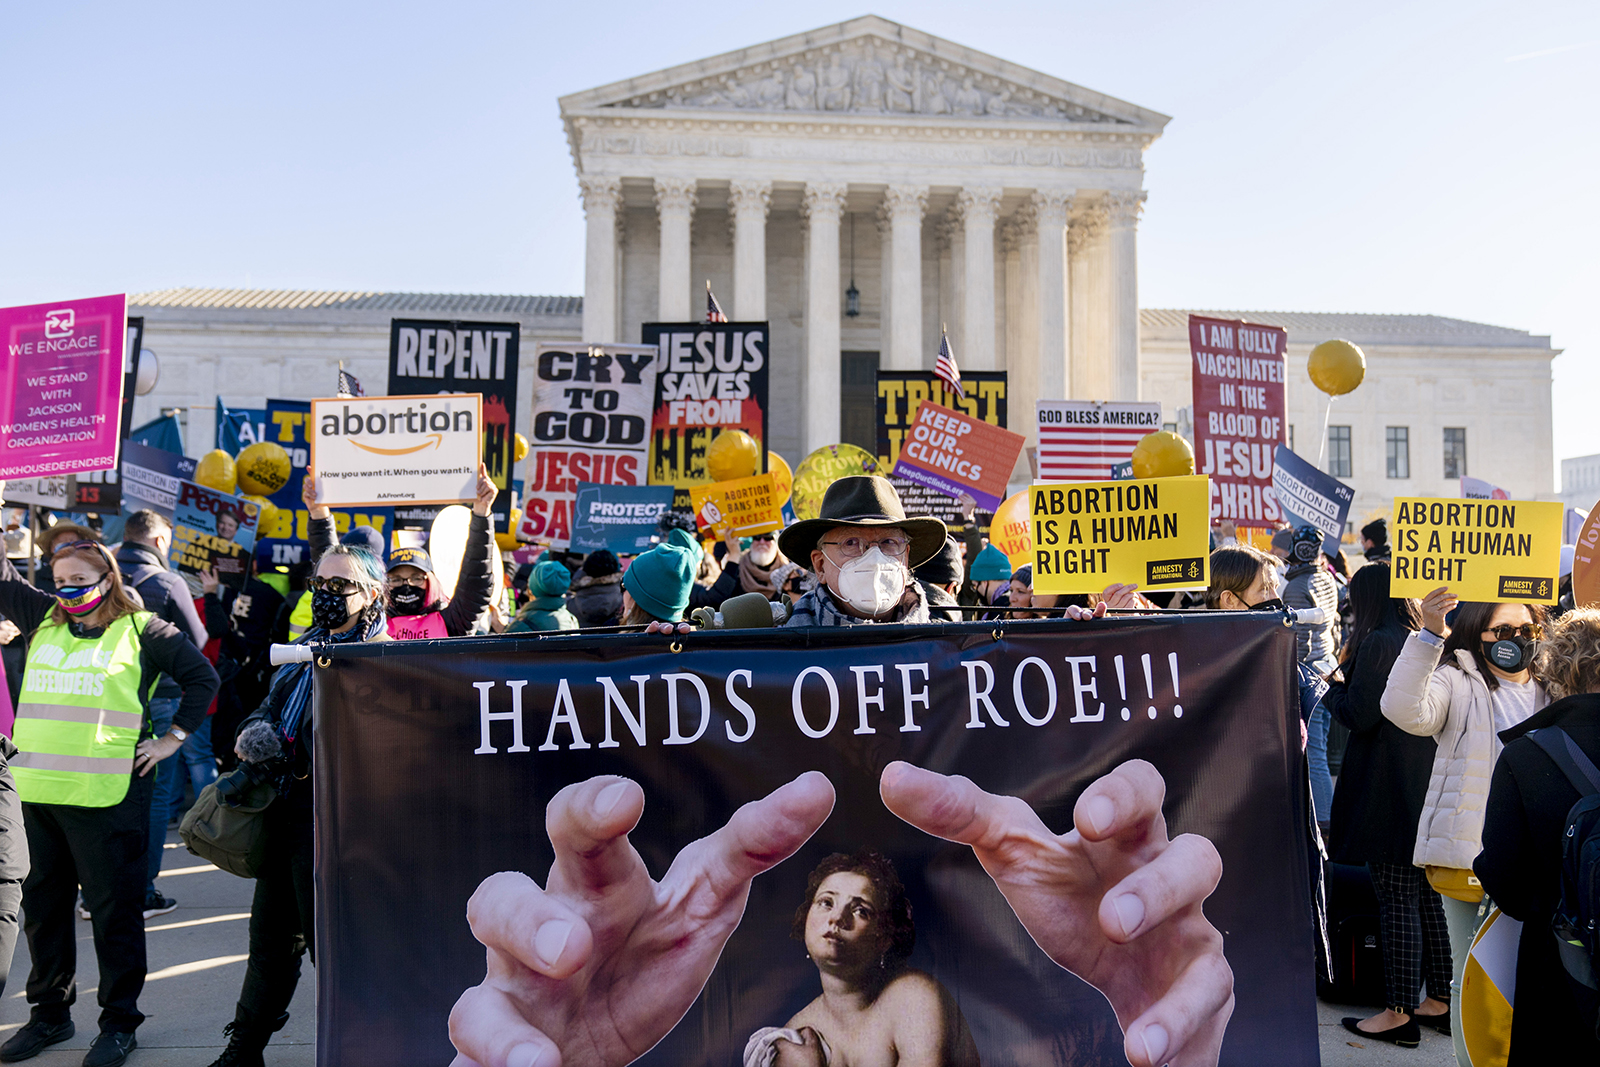 Stephen Parlato of Boulder, Colorado, holds a sign that reads "Hands Off Roe!!!" as abortion rights advocates and abortion opponents demonstrate in front of the U.S. Supreme Court, Dec. 1, 2021, in Washington. The court was hearing arguments in a case from Mississippi, where a 2018 law would ban abortions after 15 weeks of pregnancy, well before viability. (AP Photo/Andrew Harnik)